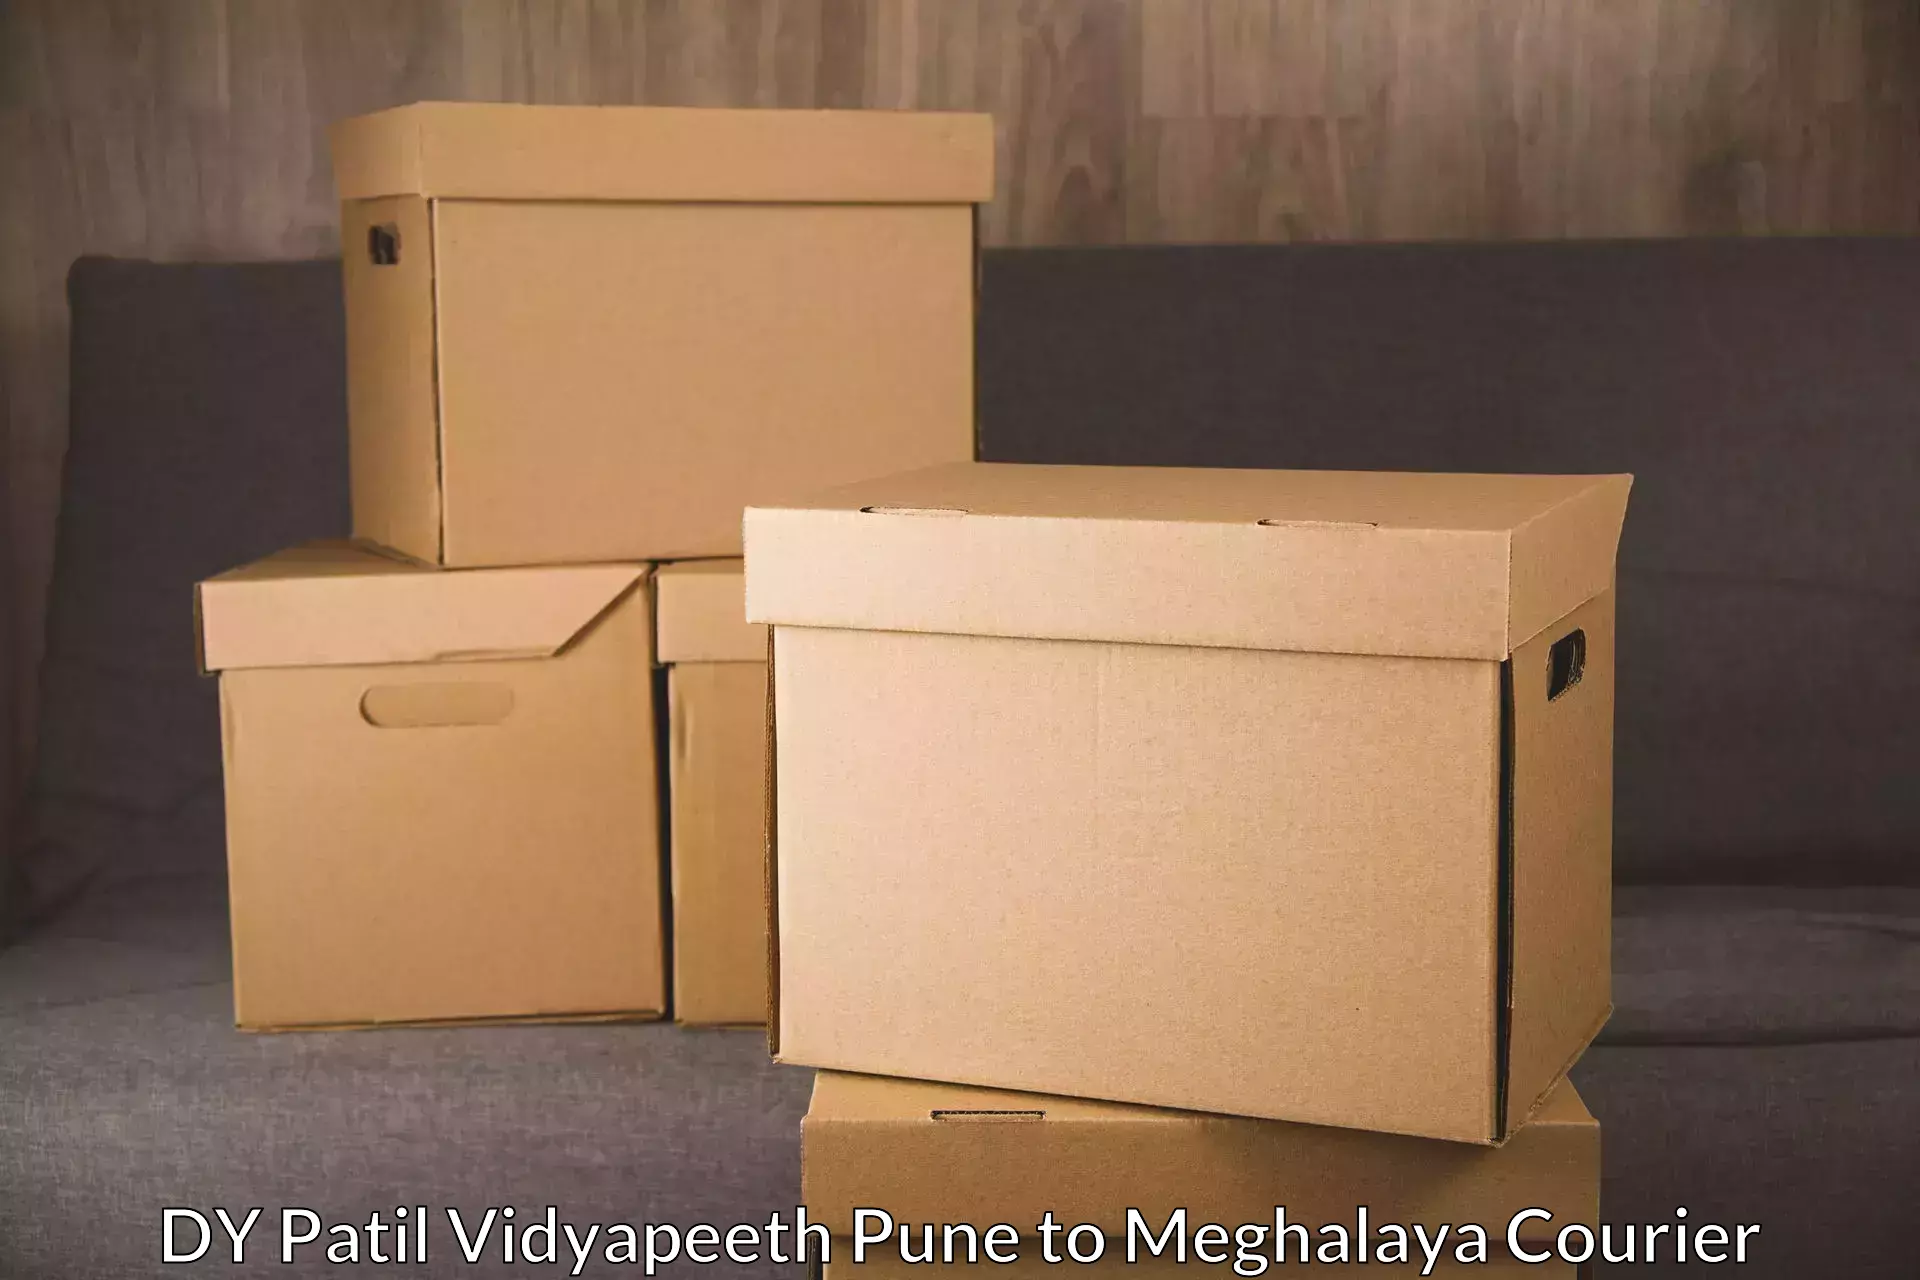 Express delivery network DY Patil Vidyapeeth Pune to Garobadha